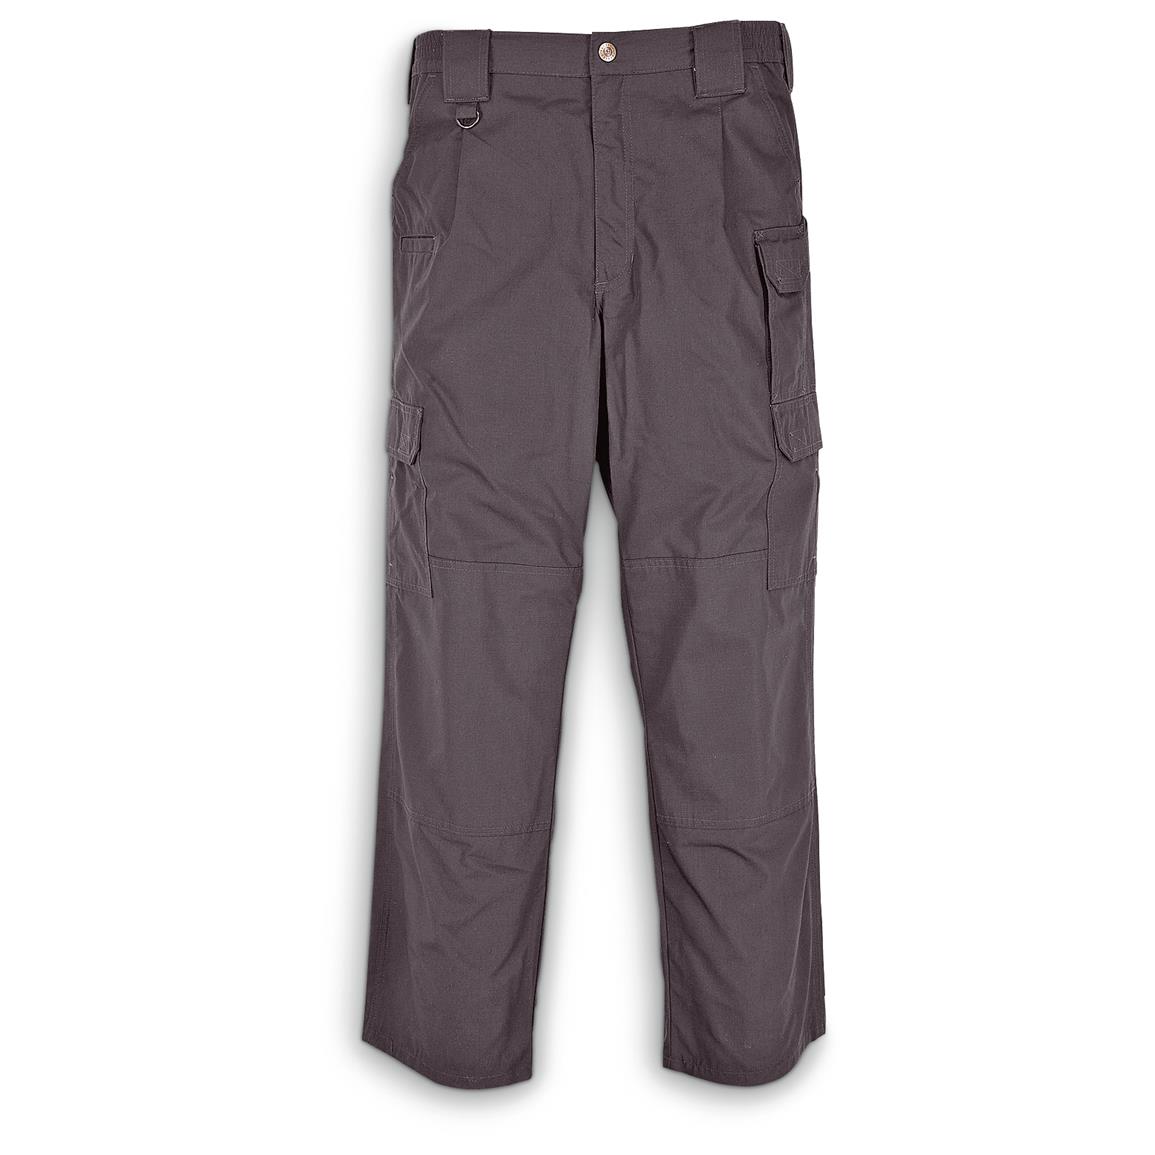 100% Cotton Rip - Stop Pants - 85160, Tactical Clothing at Sportsman's ...